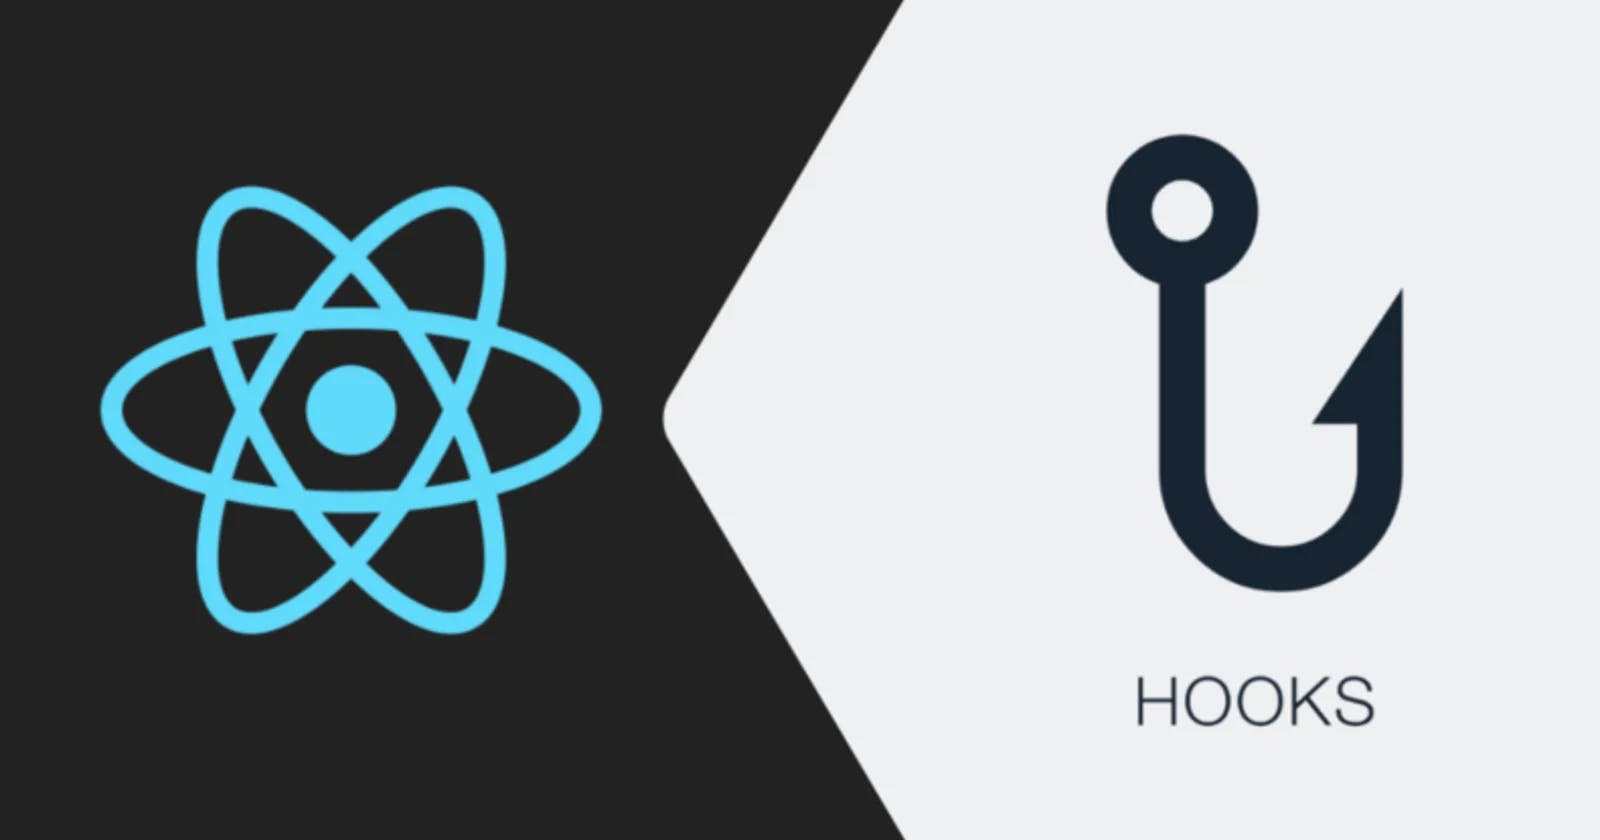 Building a Simple Counter Application in React using Custom Hooks (useReducer)